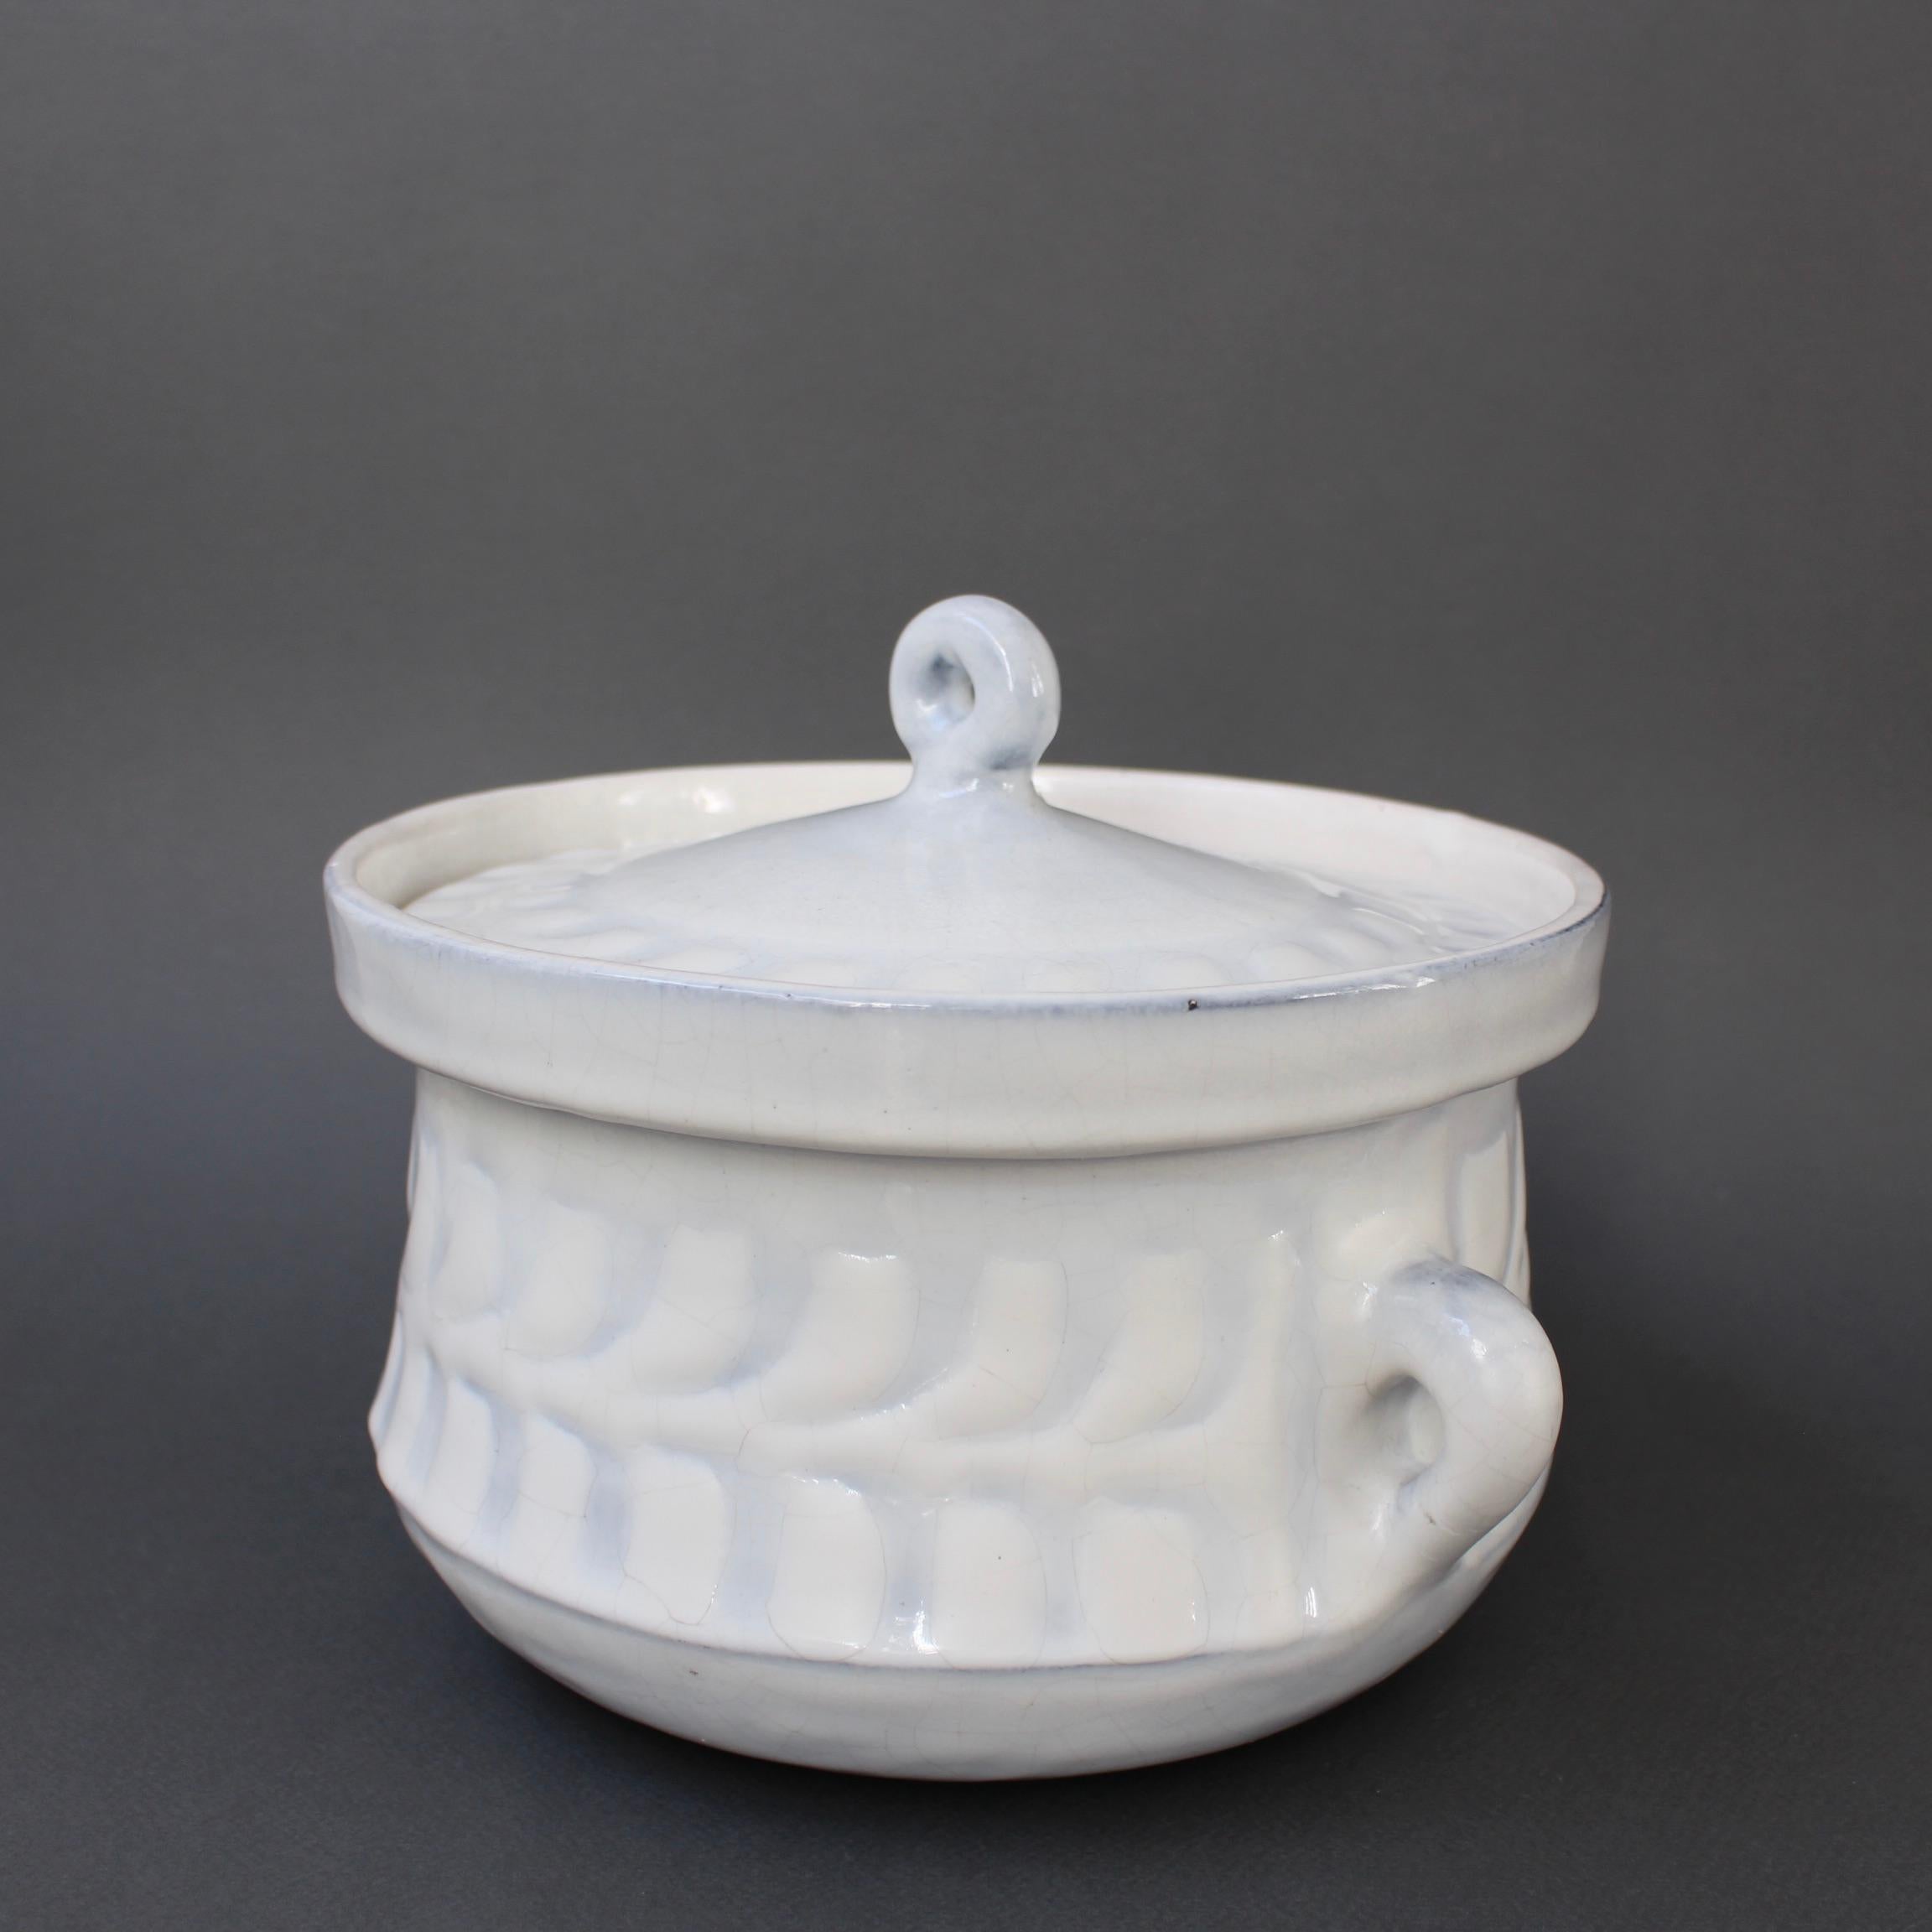 Vintage French ceramic tureen by Roger Capron (circa 1960s). A luscious creamy white base with subtle grey-blue hues in the repeating décor pattern is graceful and charming all at once - elegant in all its simplicity. The bowl has handles on both